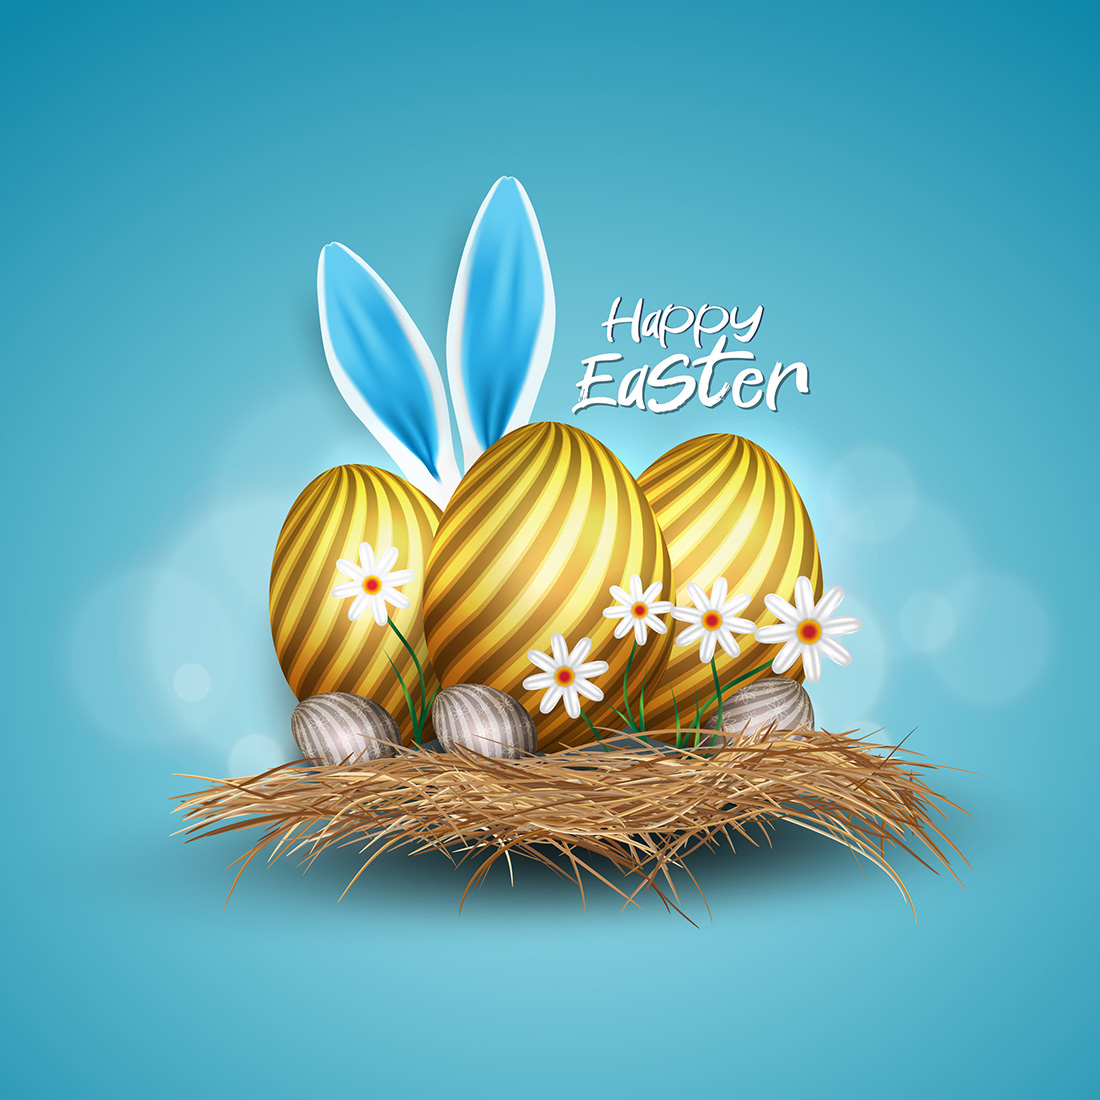 Happy Easter Illustration Cover Image.